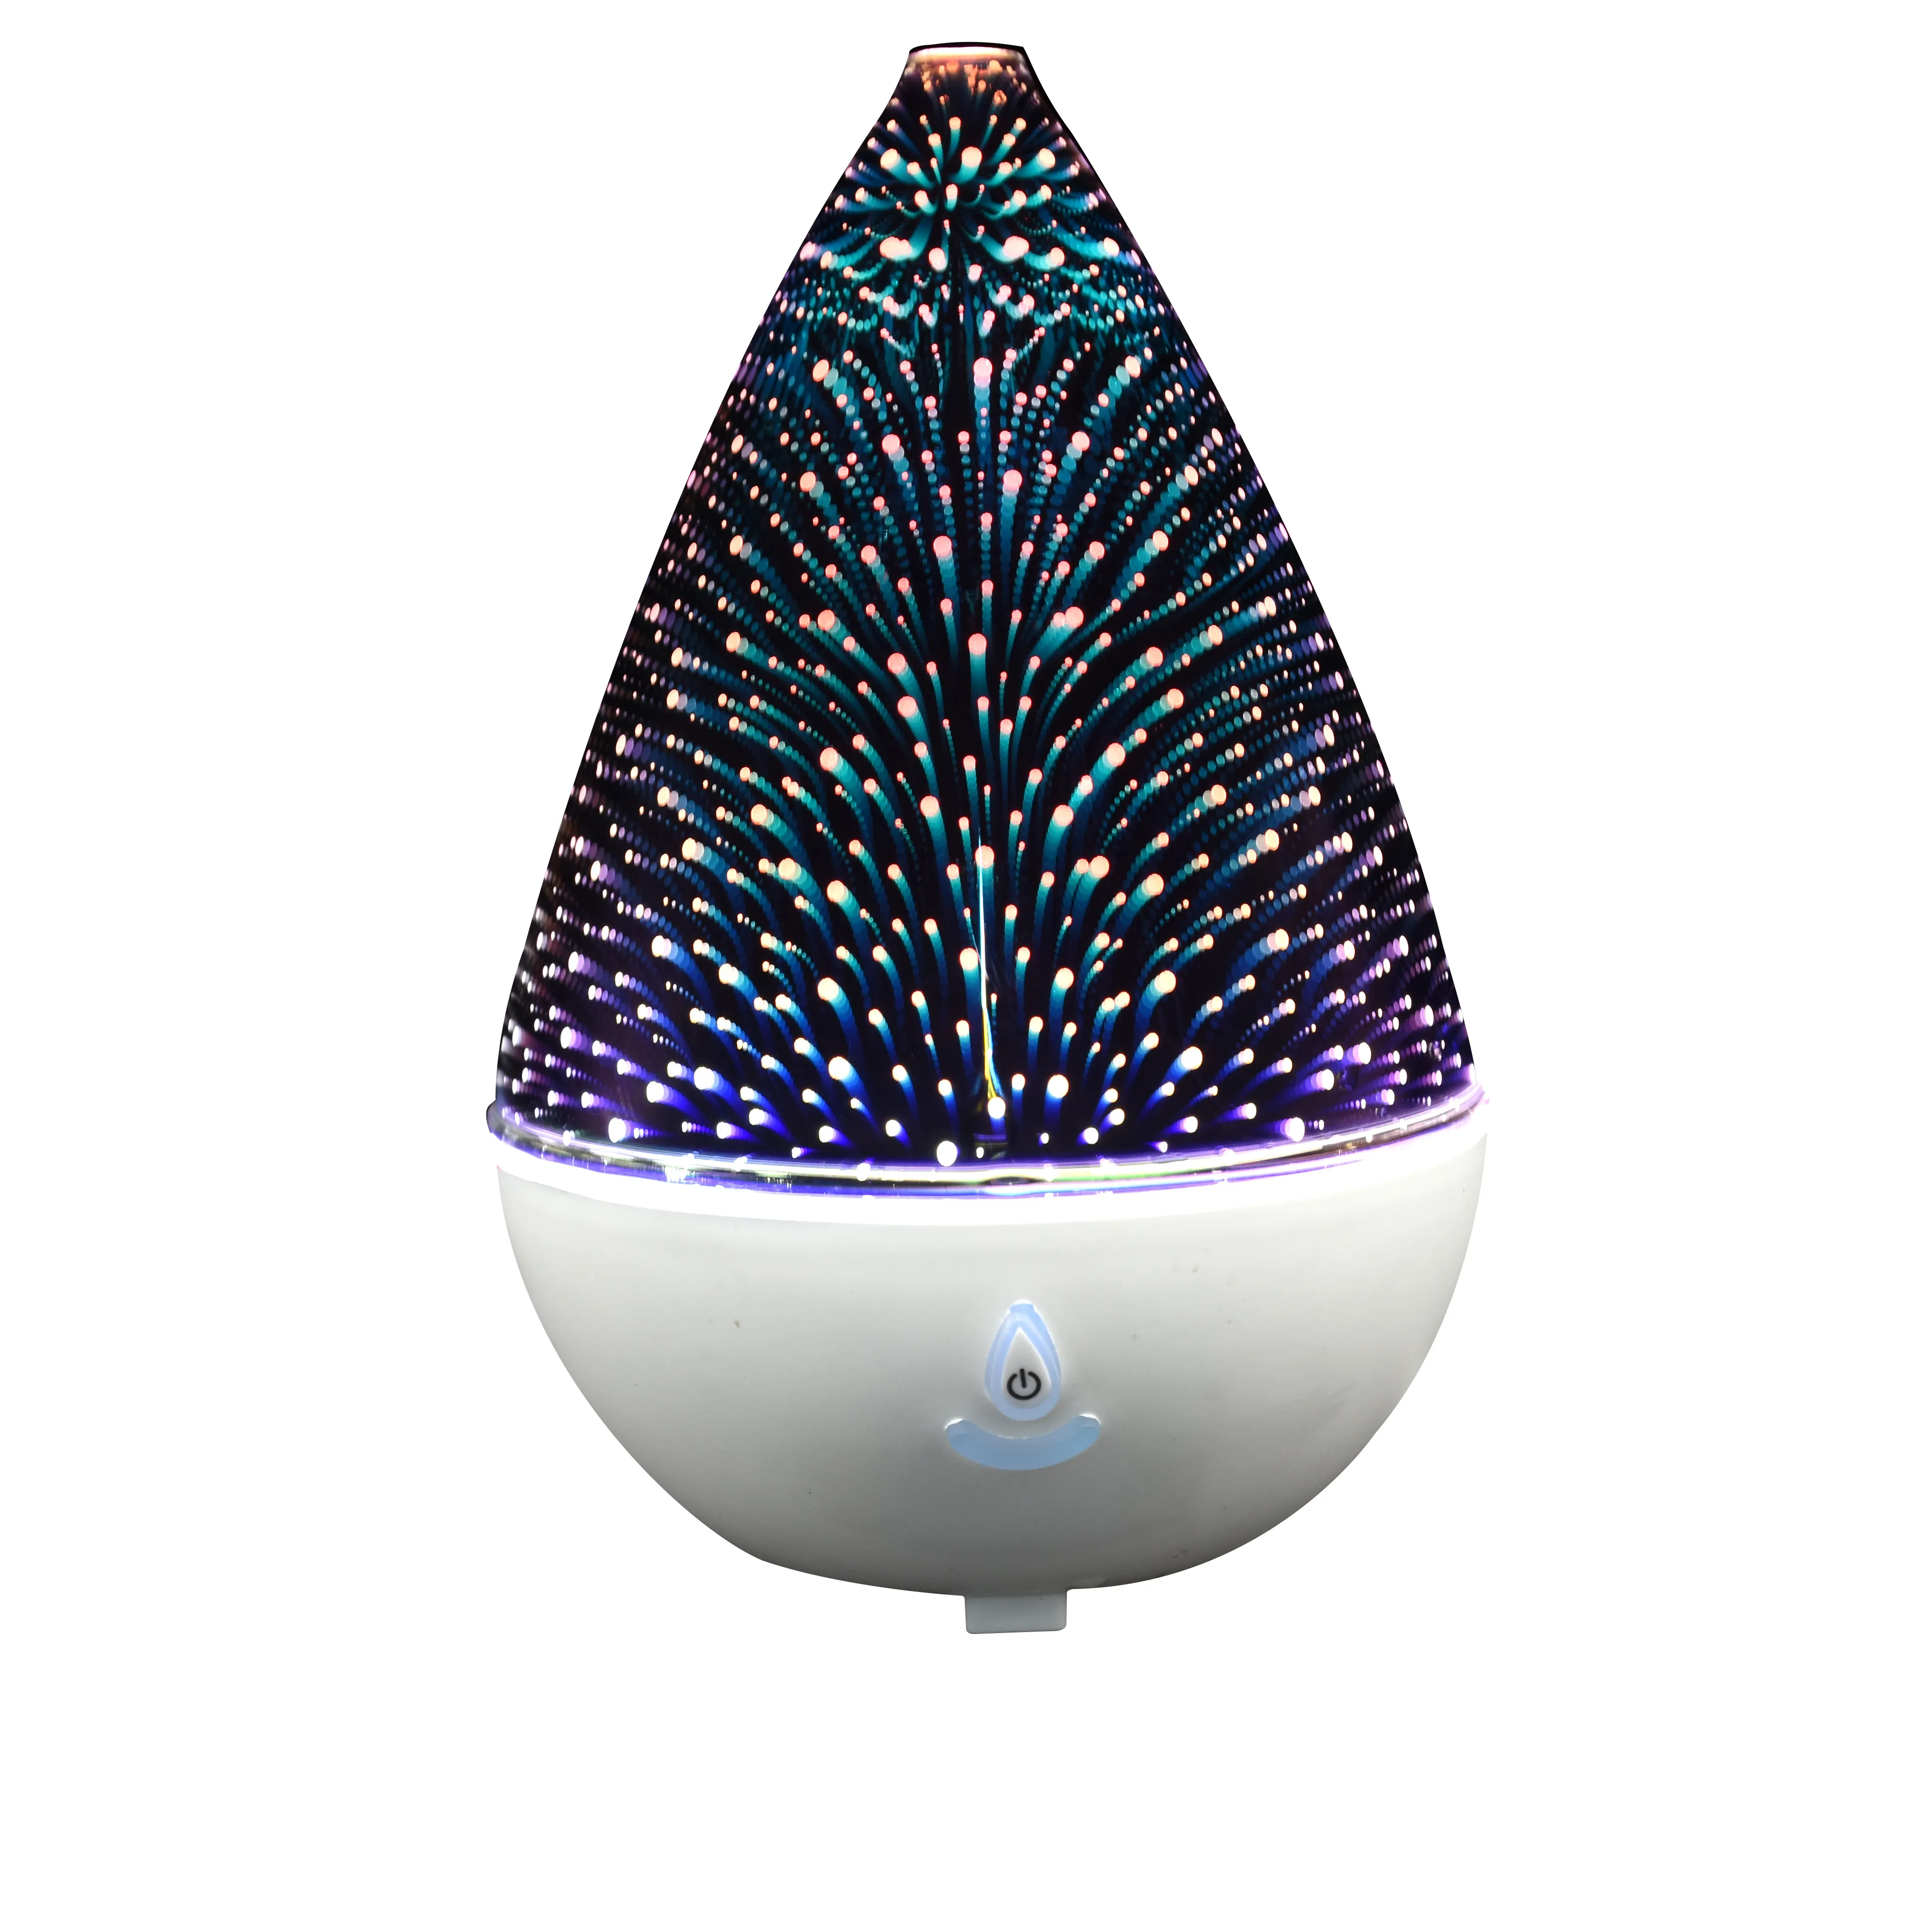 Essential Oil Diffuser 3D Glass Galaxy Star Light 6 Color LED Changing Timing Ultrasonic Cool Mist Humidifier Spa